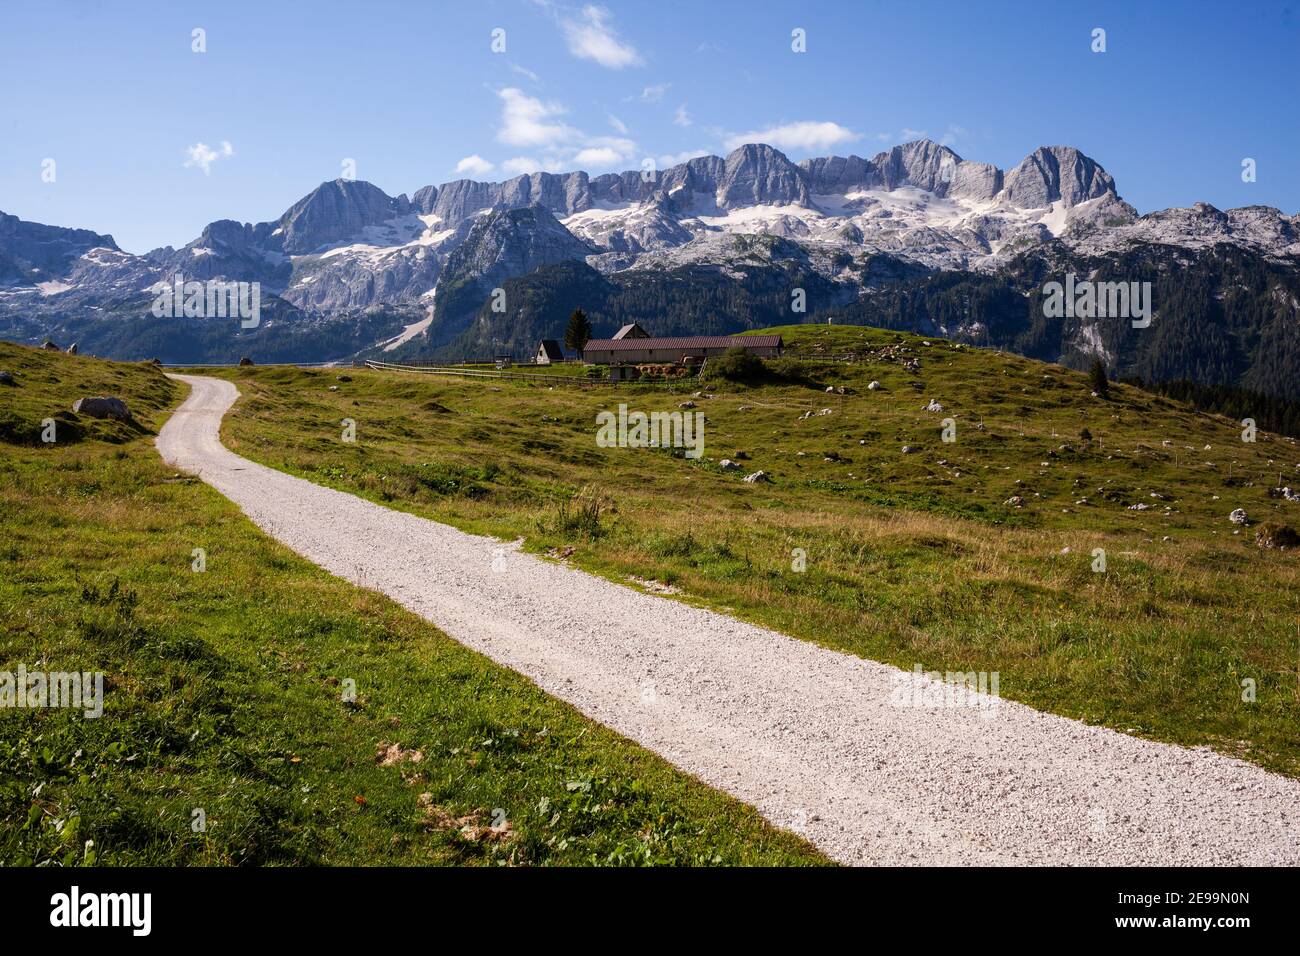 Empty dirt road in Alps with mountain view of Canin in the distance and green pastures with barn in the middle. Stock Photo